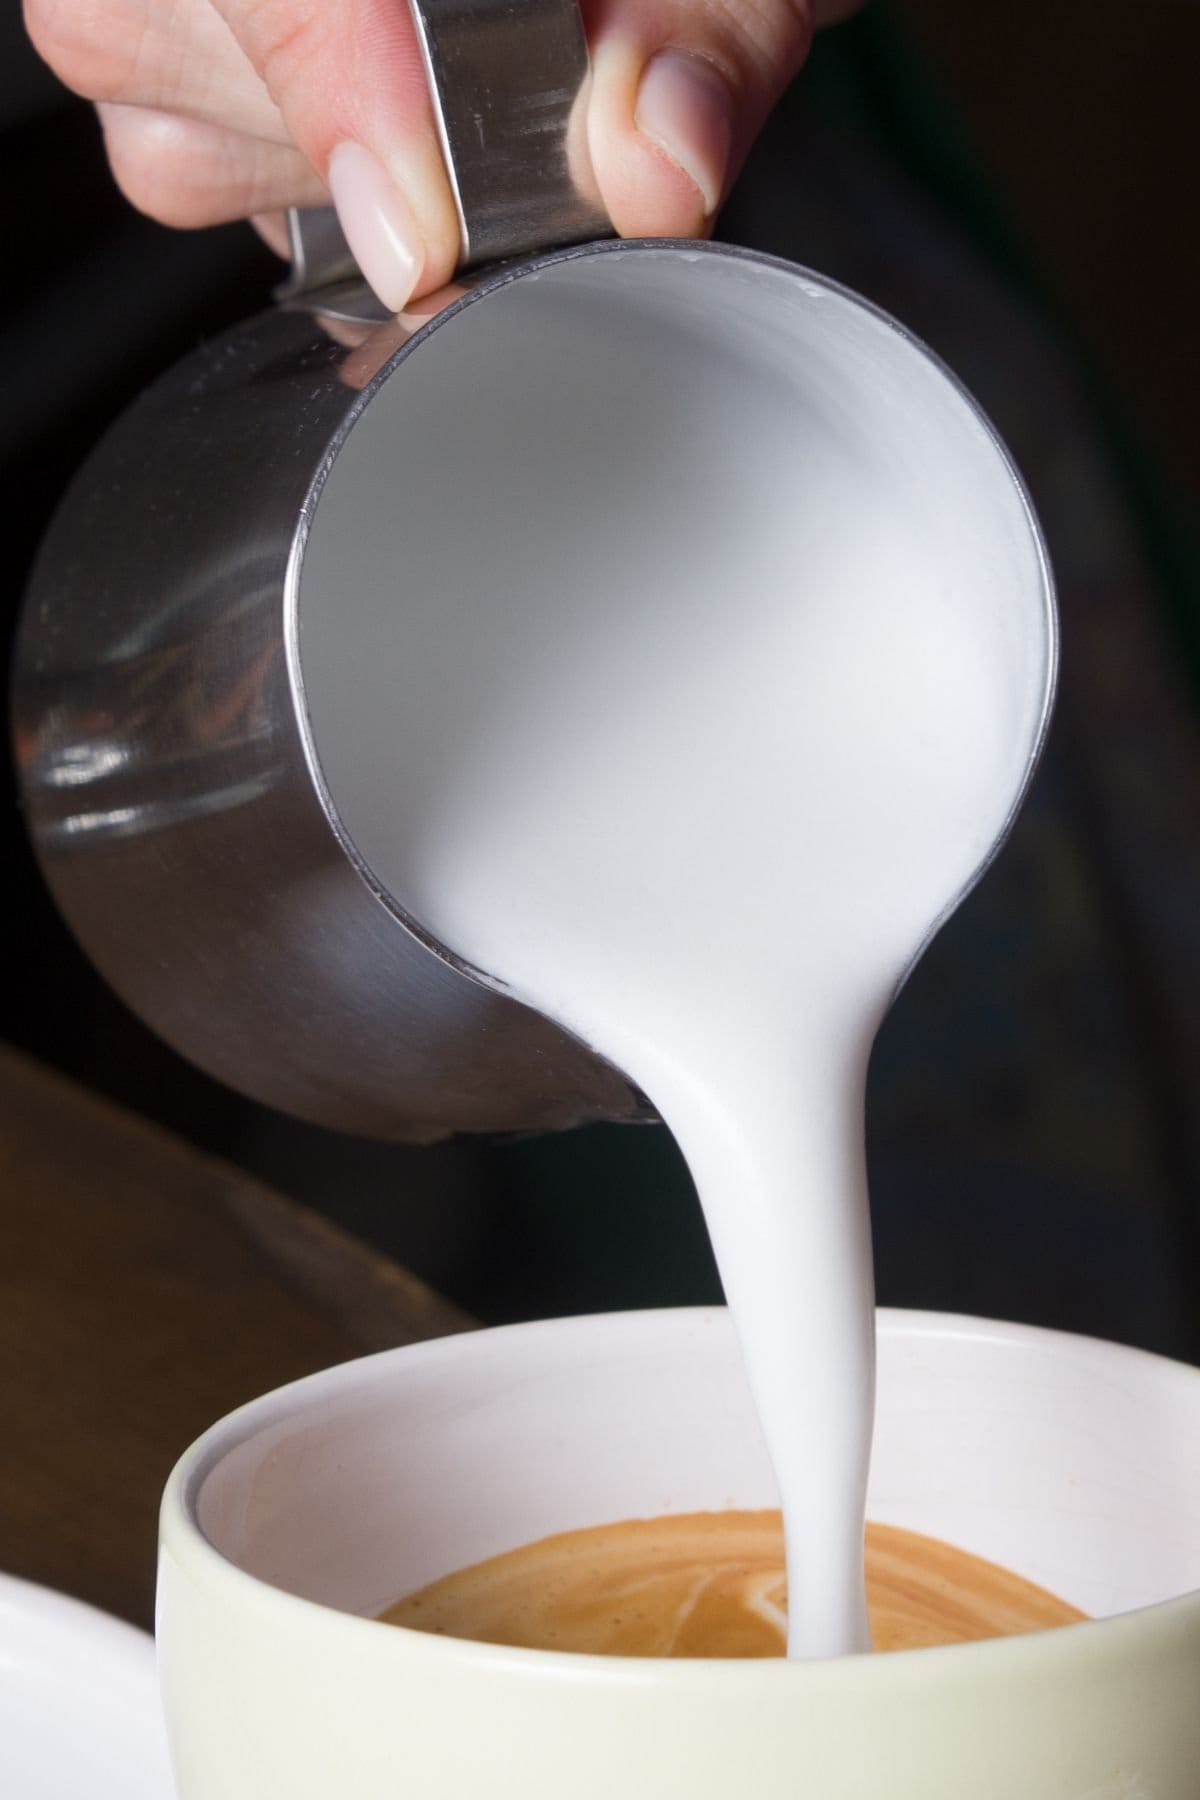 How To: Milk Frothing for Beginners 5 Tips 